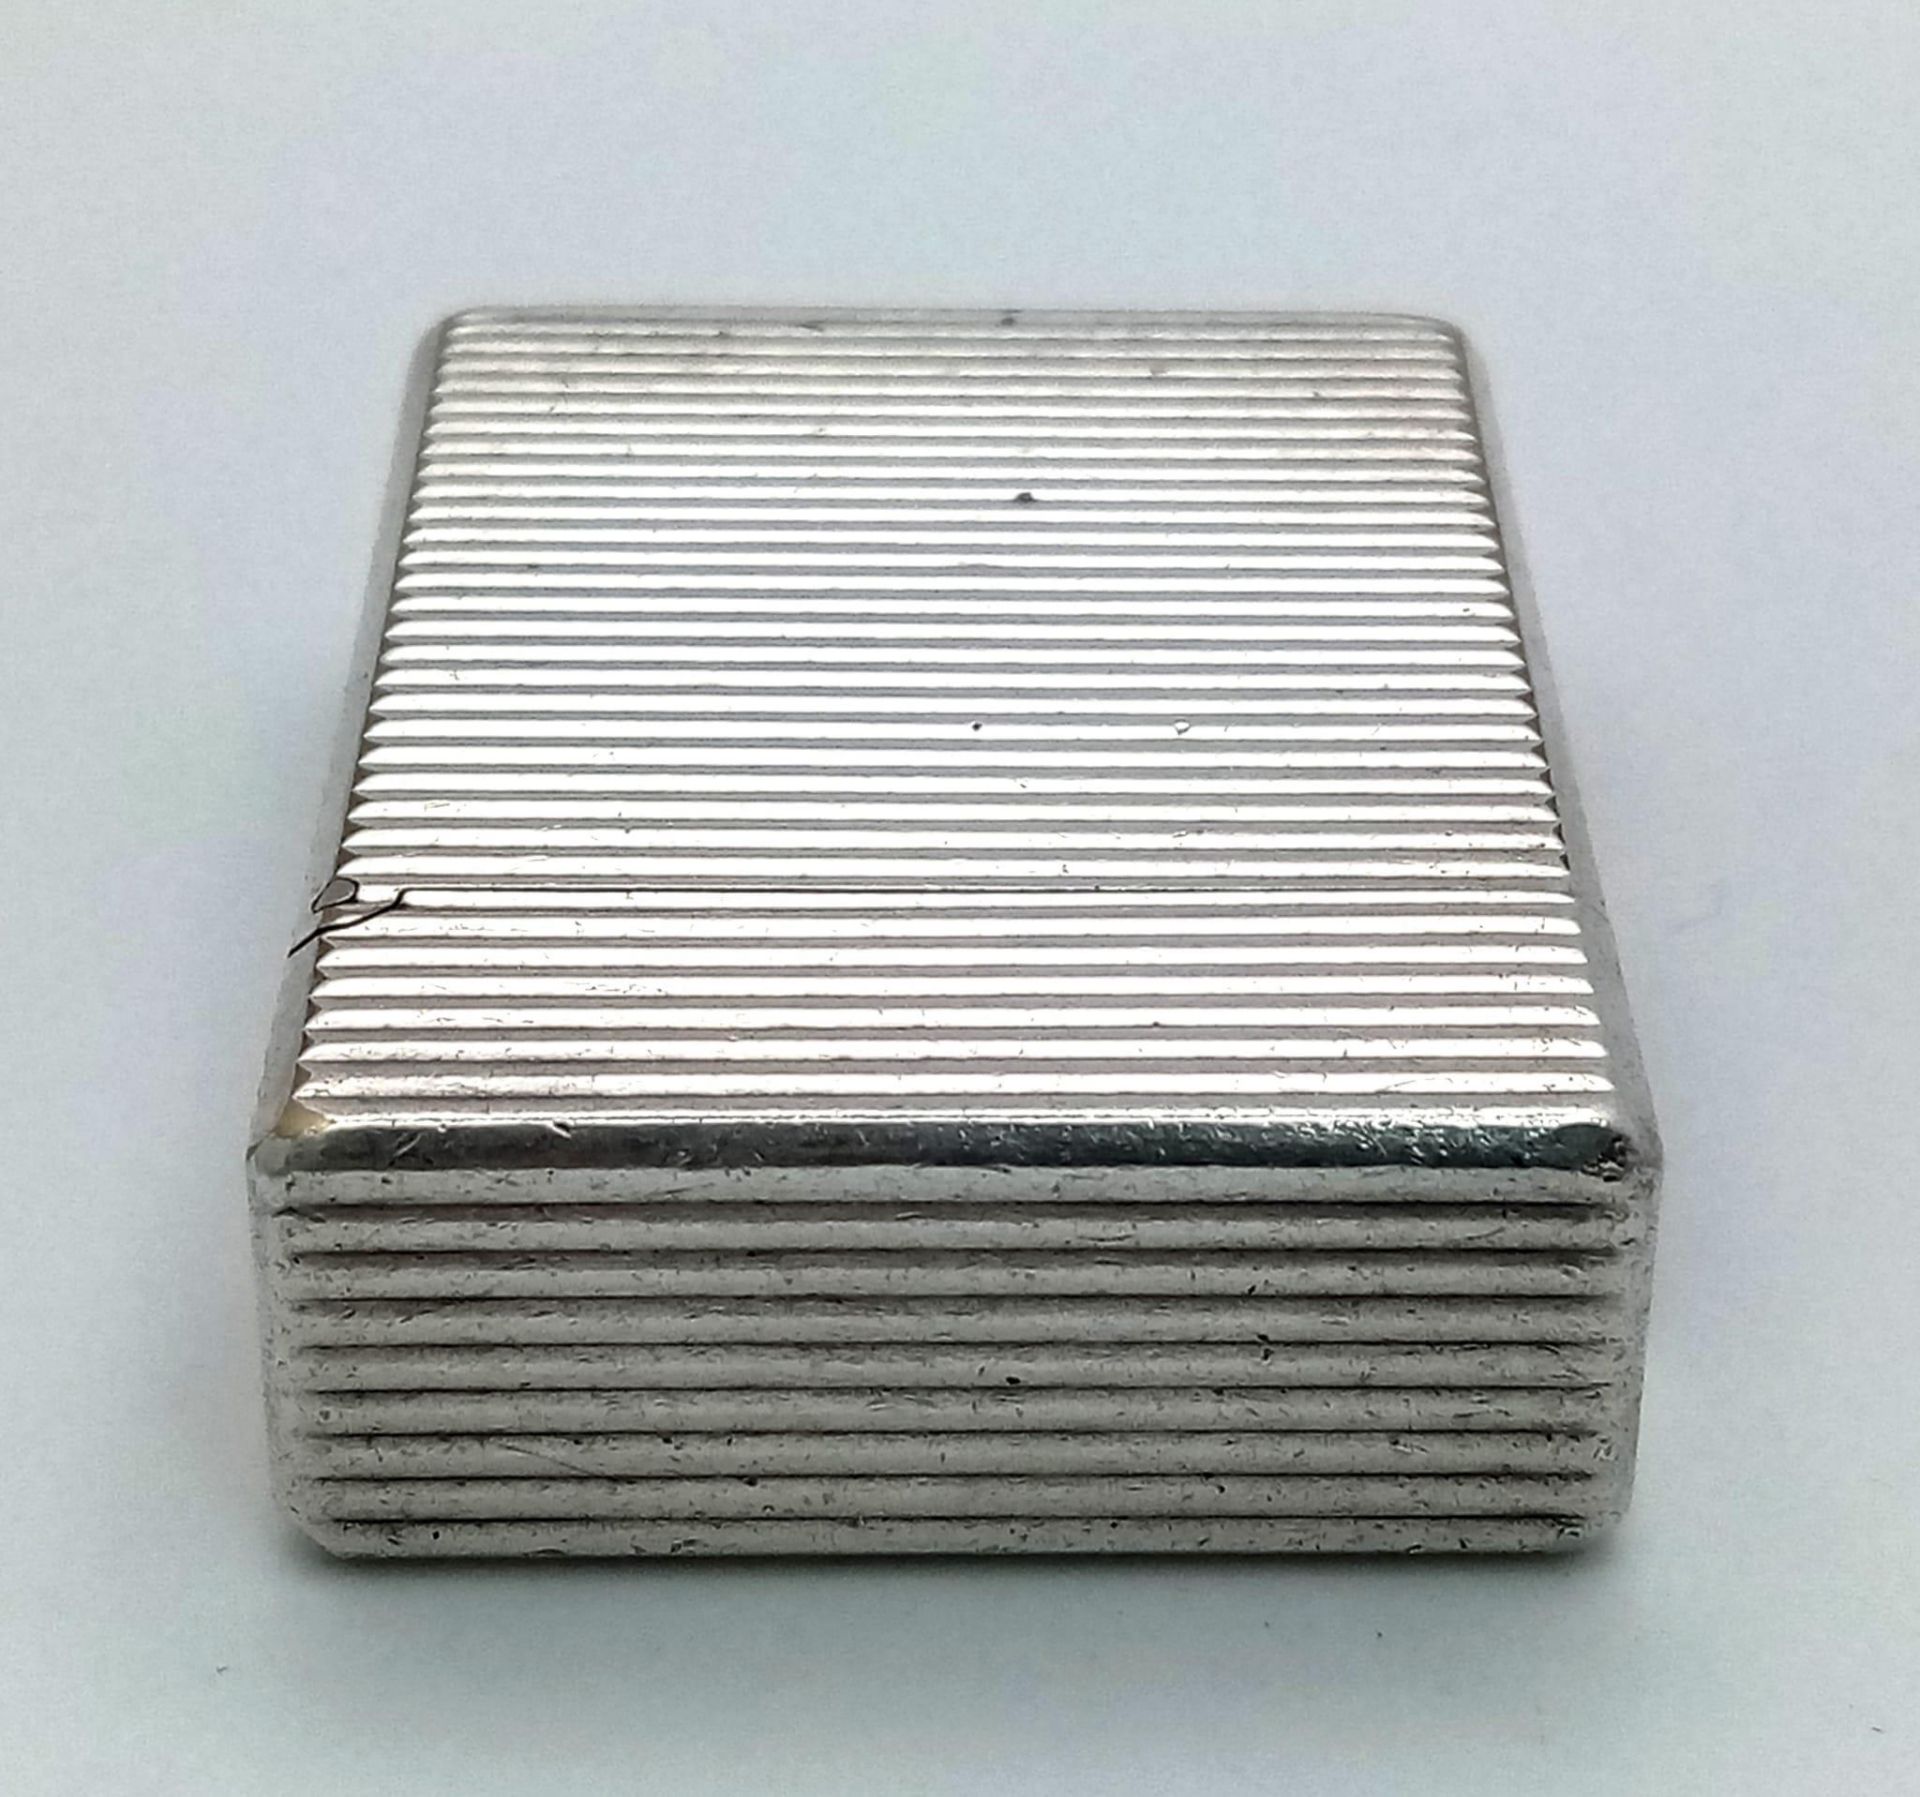 A Vintage ST Dupont Silver Plated Lighter. Needs gas and flint. 4.5 x 3.5cm. UK Mainland Sales Only - Bild 5 aus 5